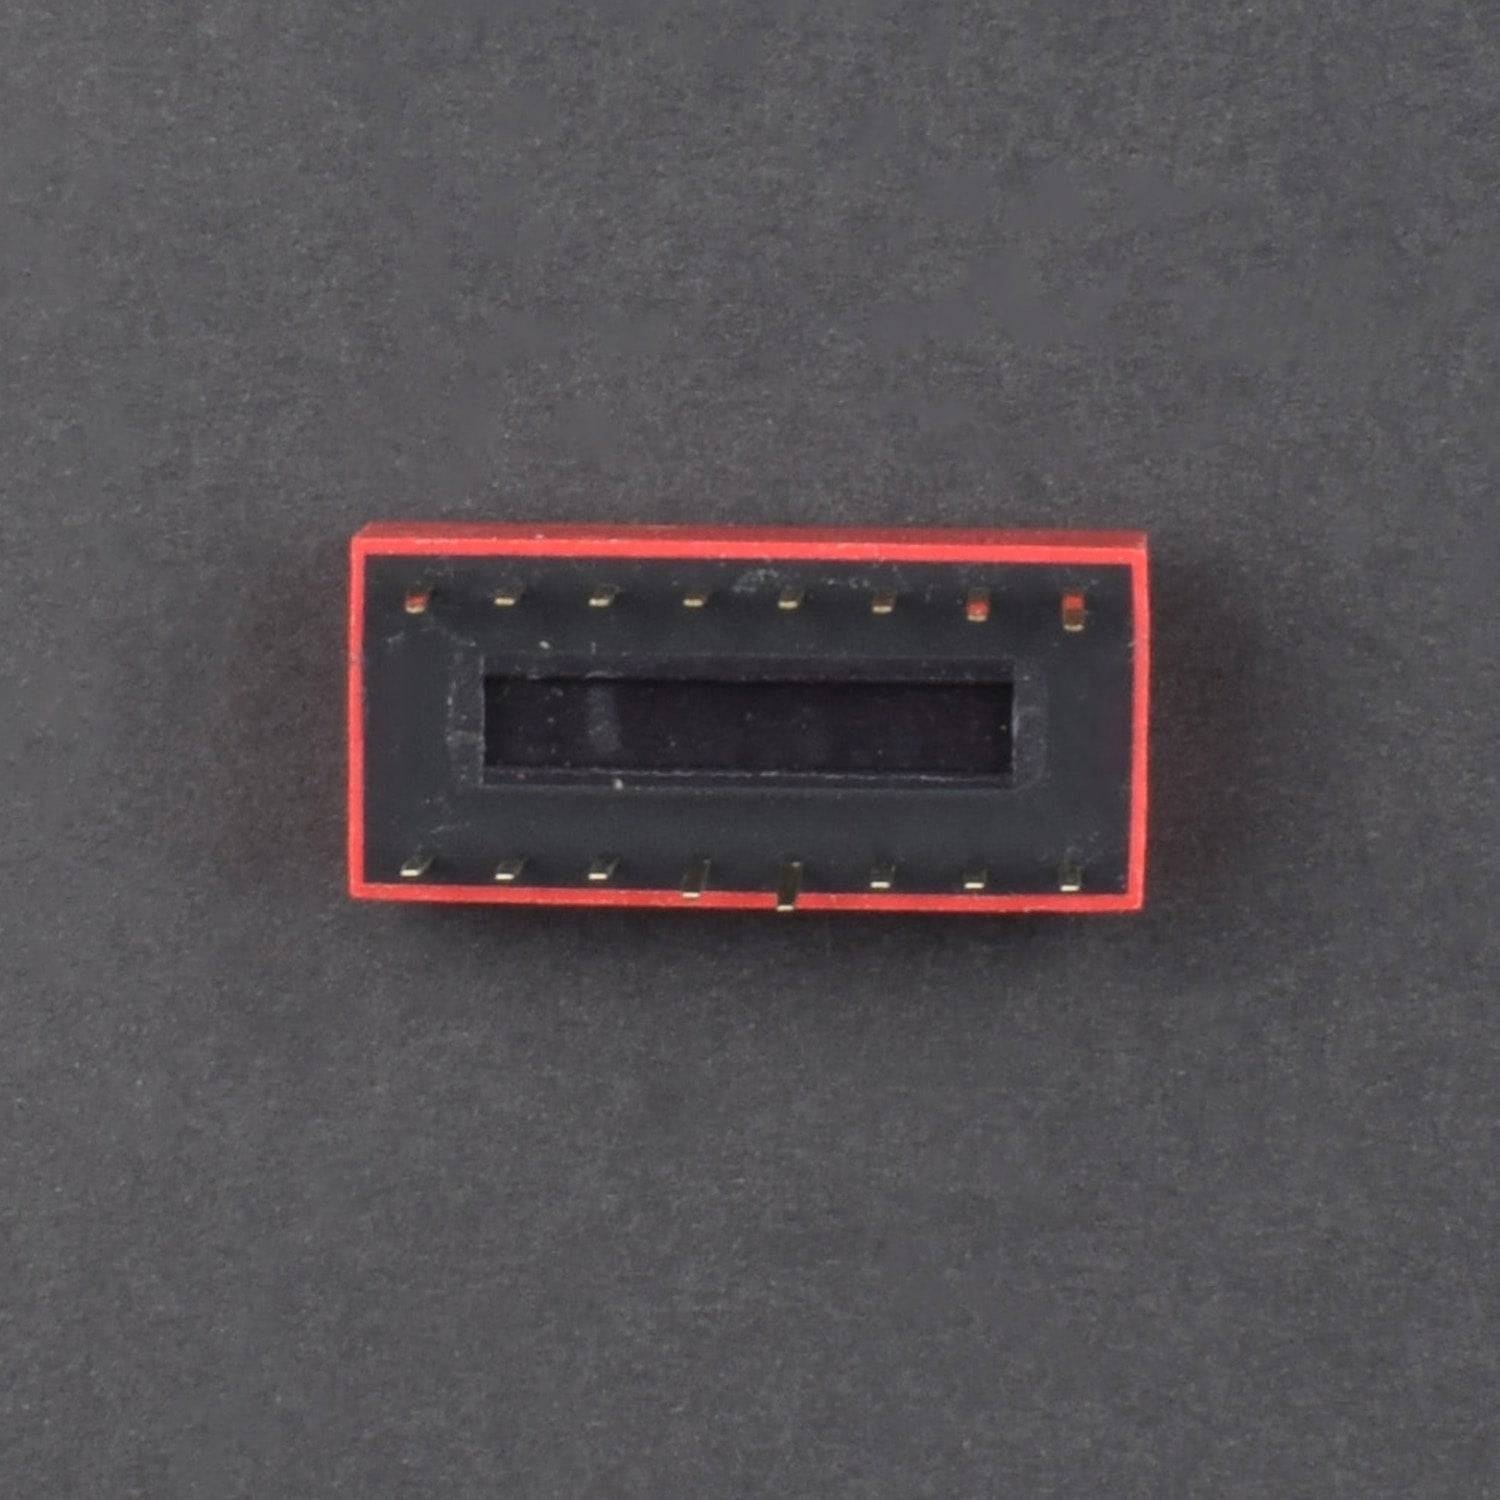 8 Position 8Pin DIP Switch 2.54mm Pitch 2 Row 8P Slide DIP Switch - RS225 - REES52